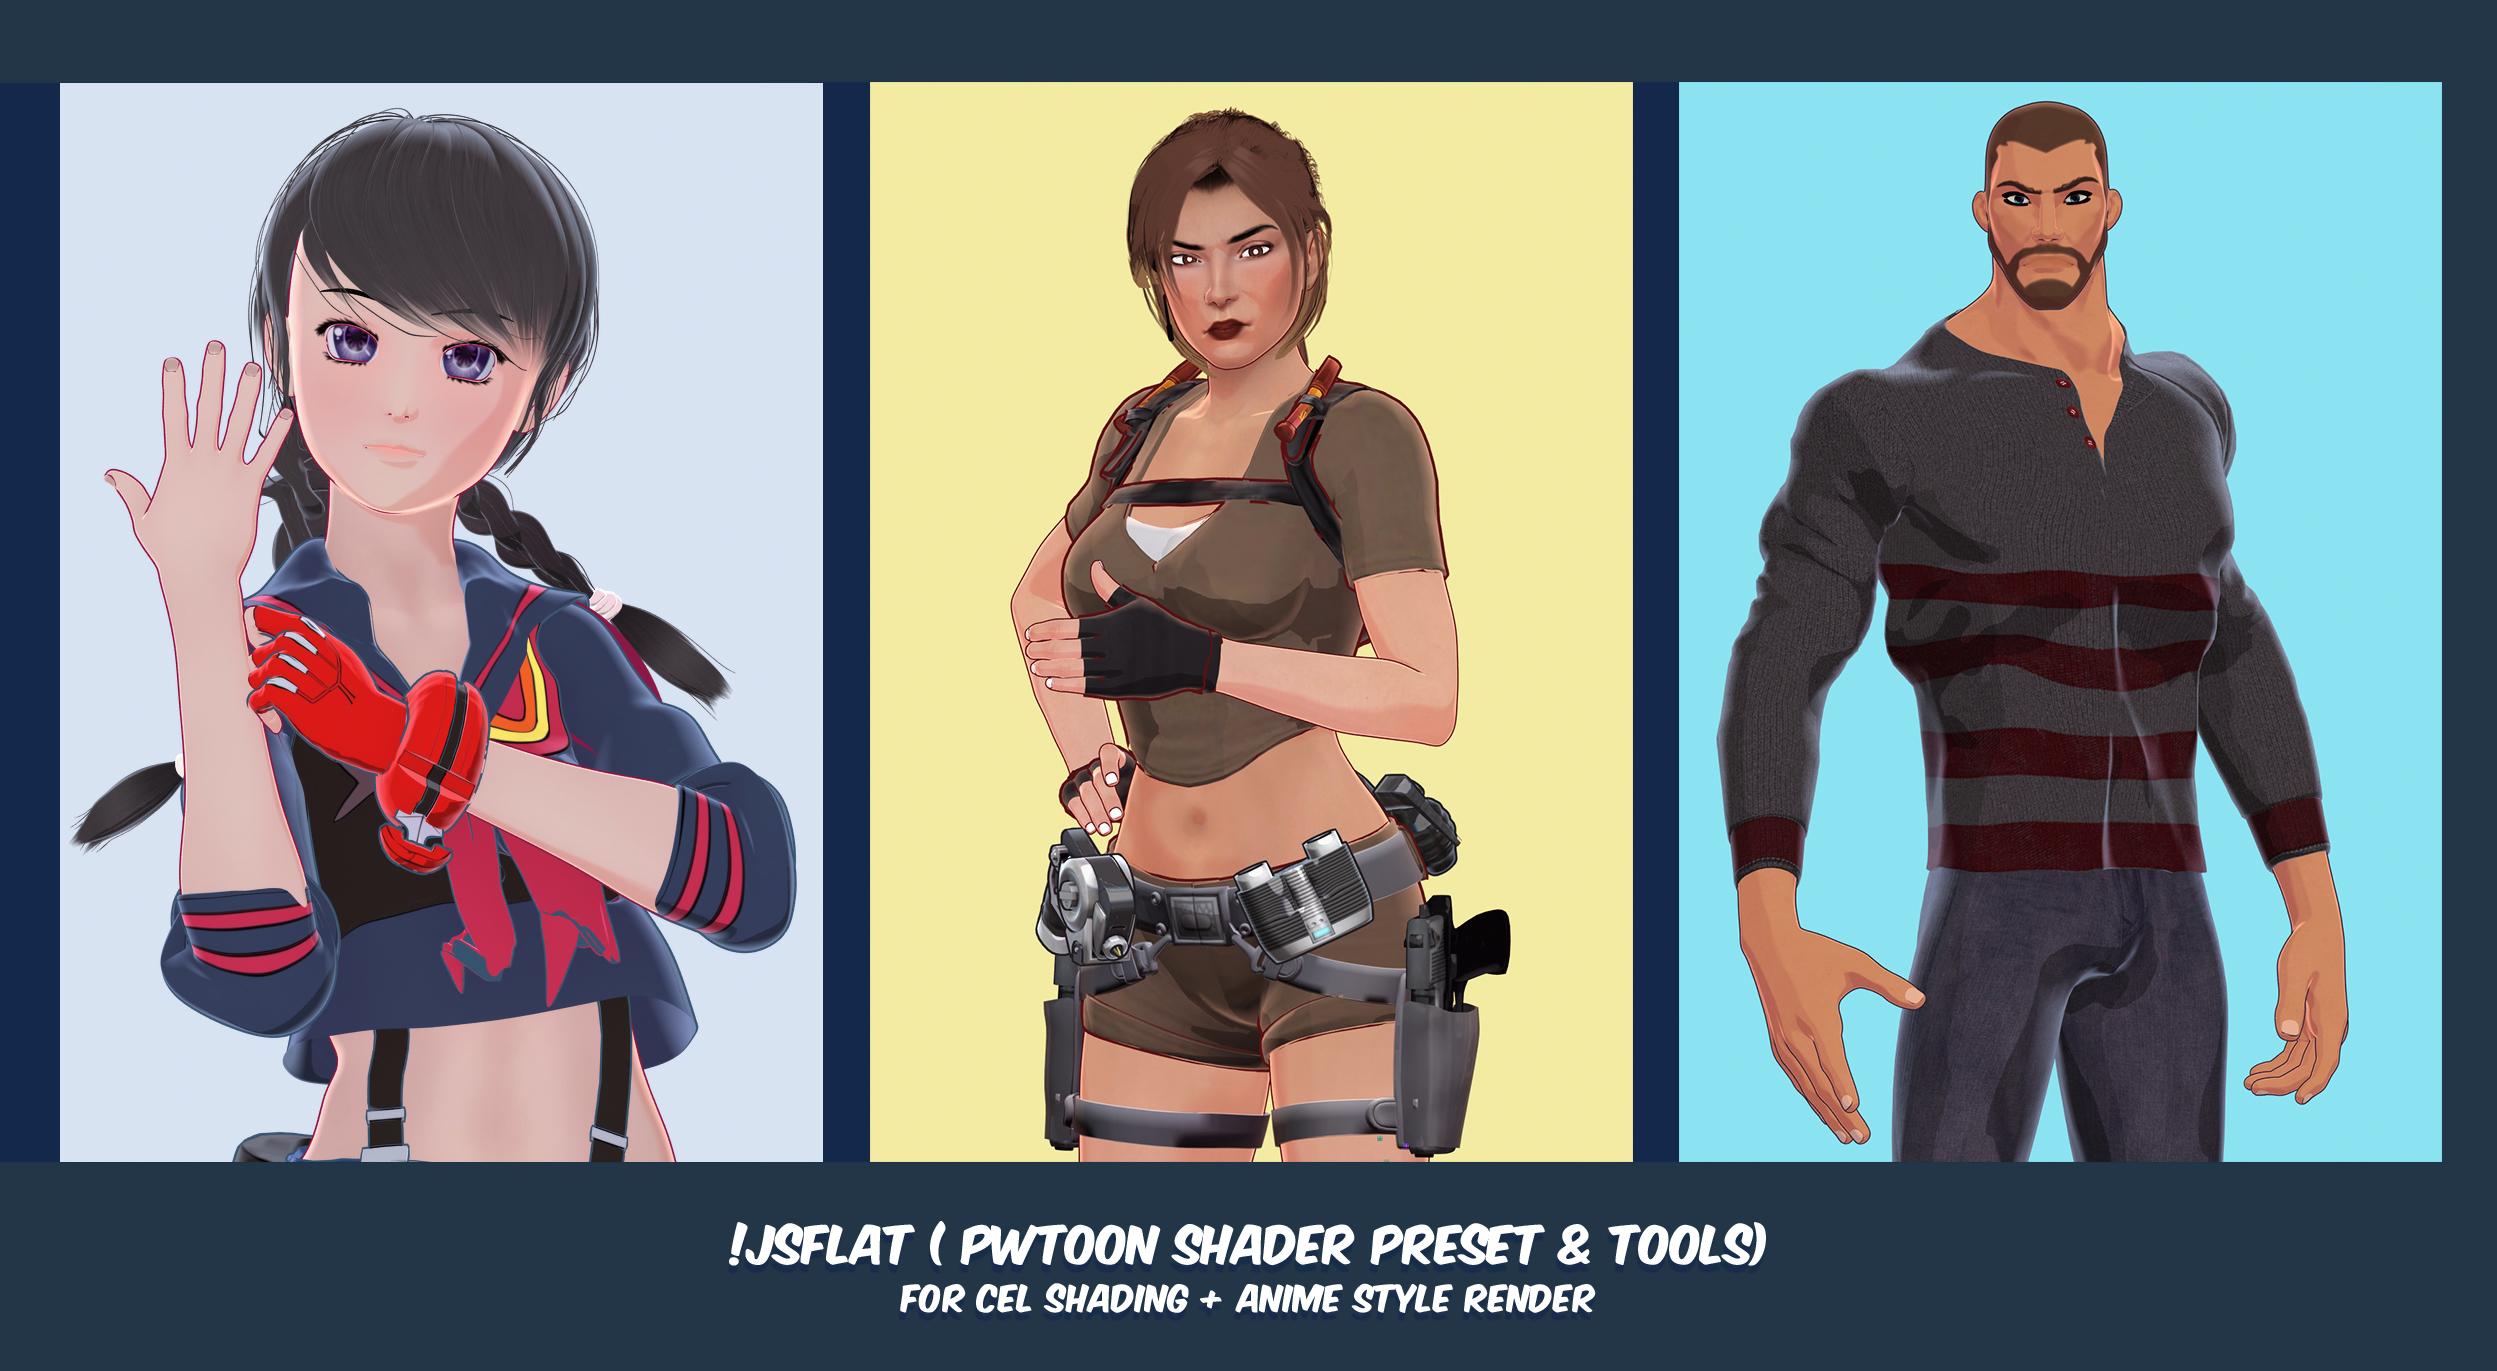 JS Flat - Pwtoon presets for Cel Shading and Anime Render - Daz 3D